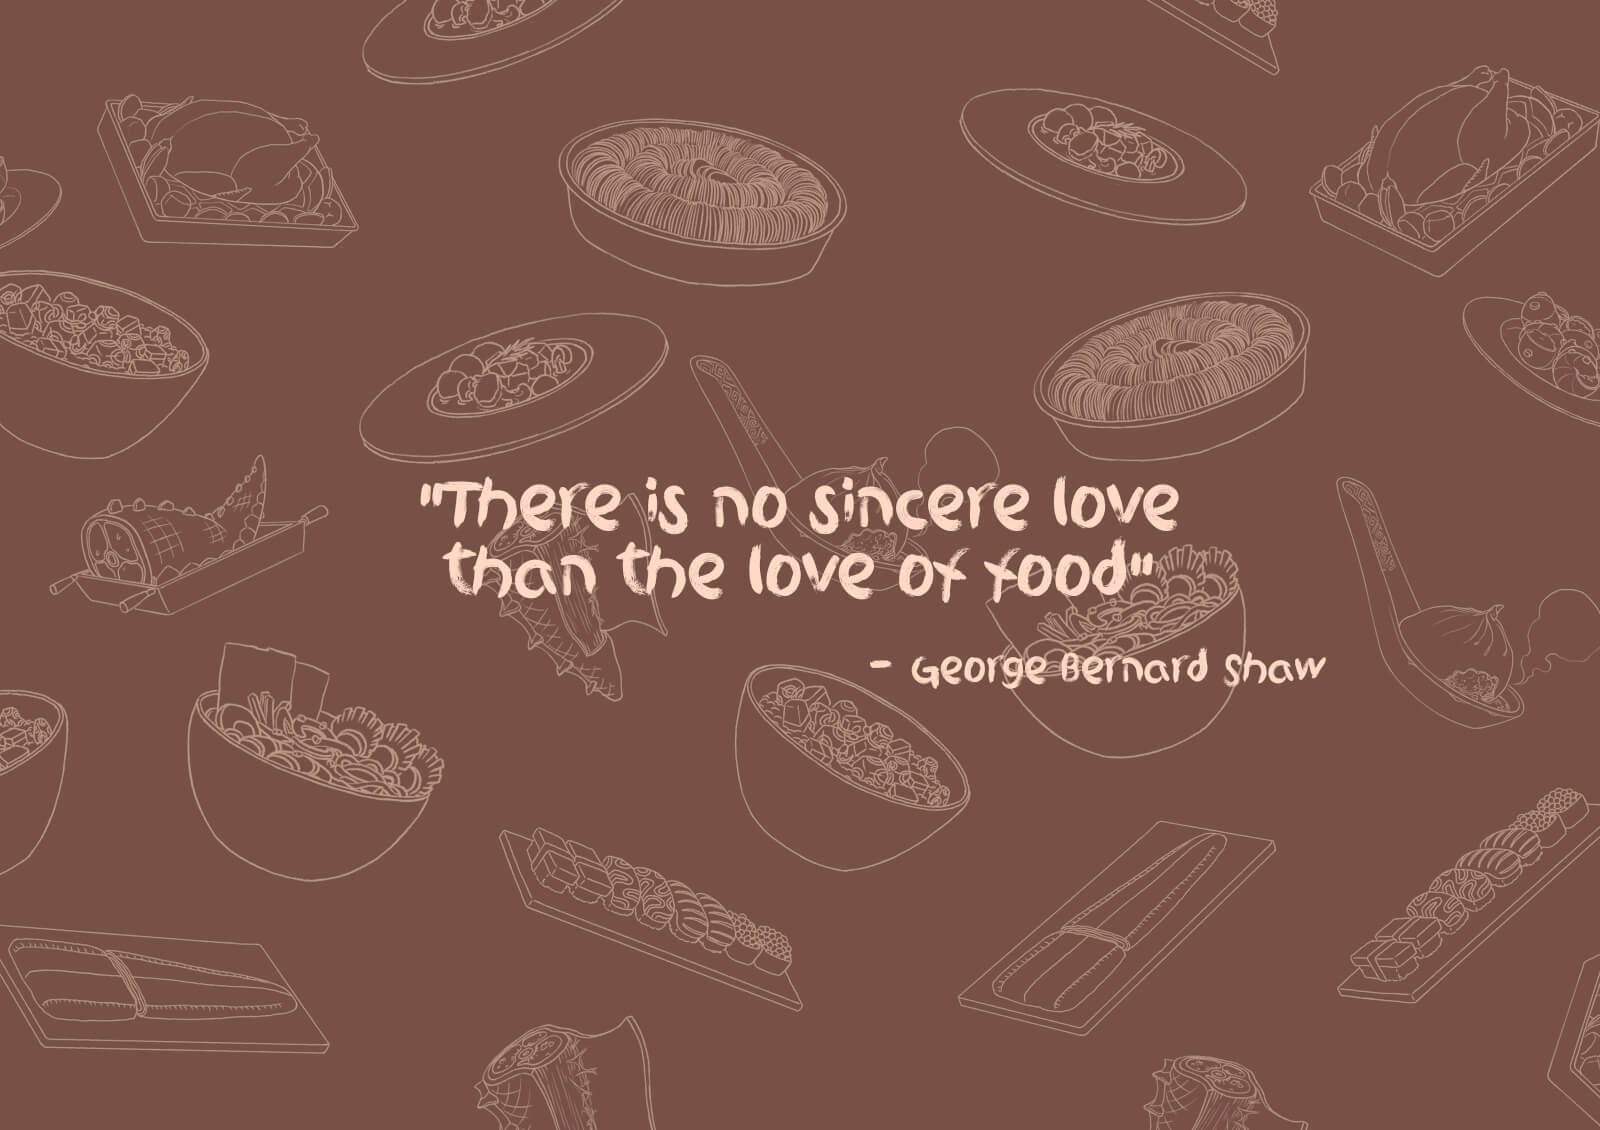 Quote from George Bernard: There is no sincere love than the love of food